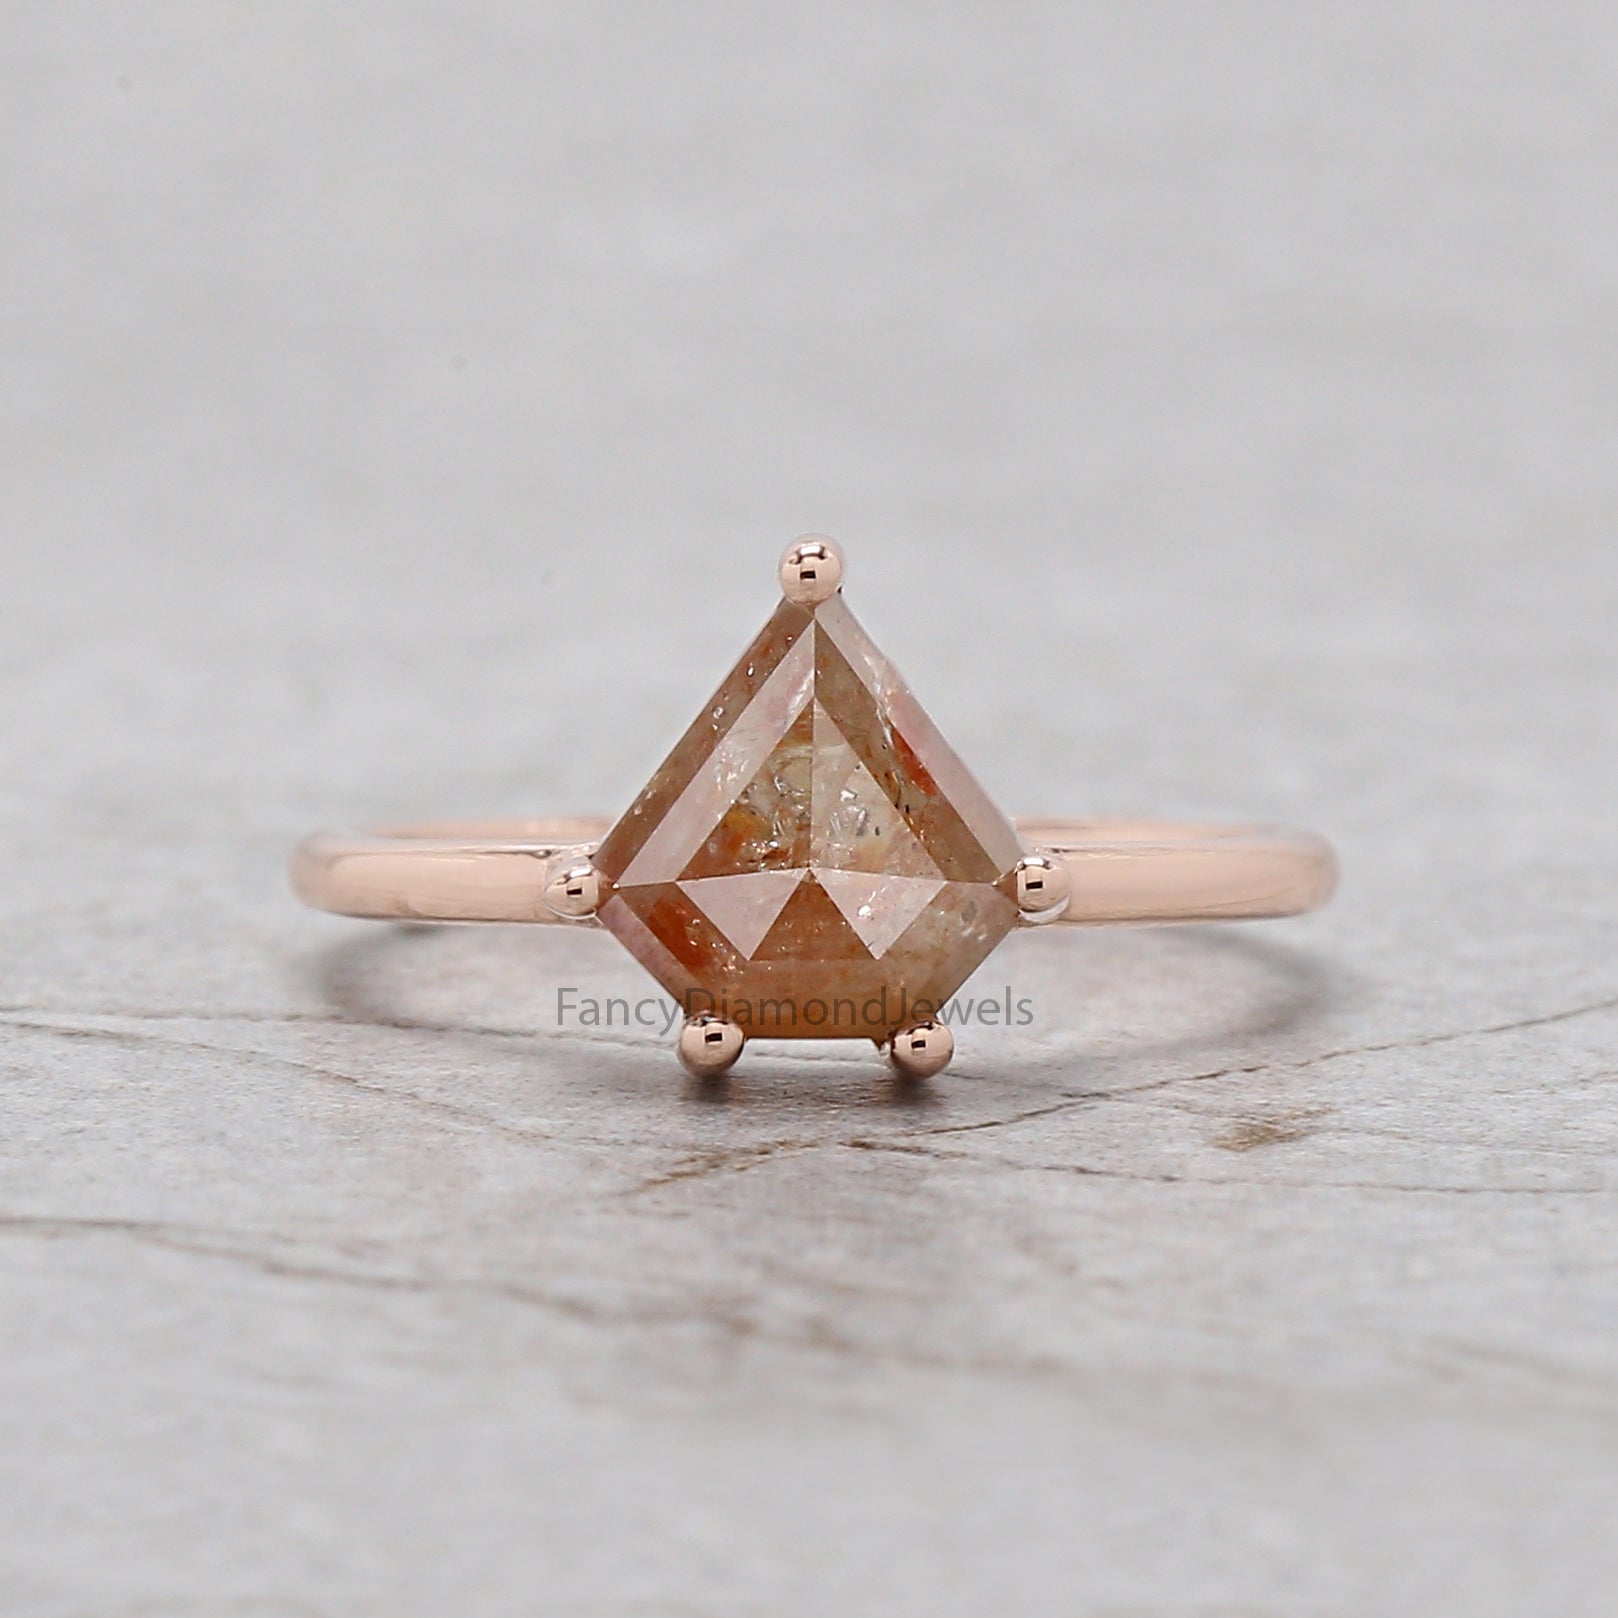 Shield Cut Brown Color Diamond Ring 2.30 Ct 8.50 MM Shield Shape Diamond Ring 14K Solid Rose Gold Shield Engagement Ring Gift For Her KDN505